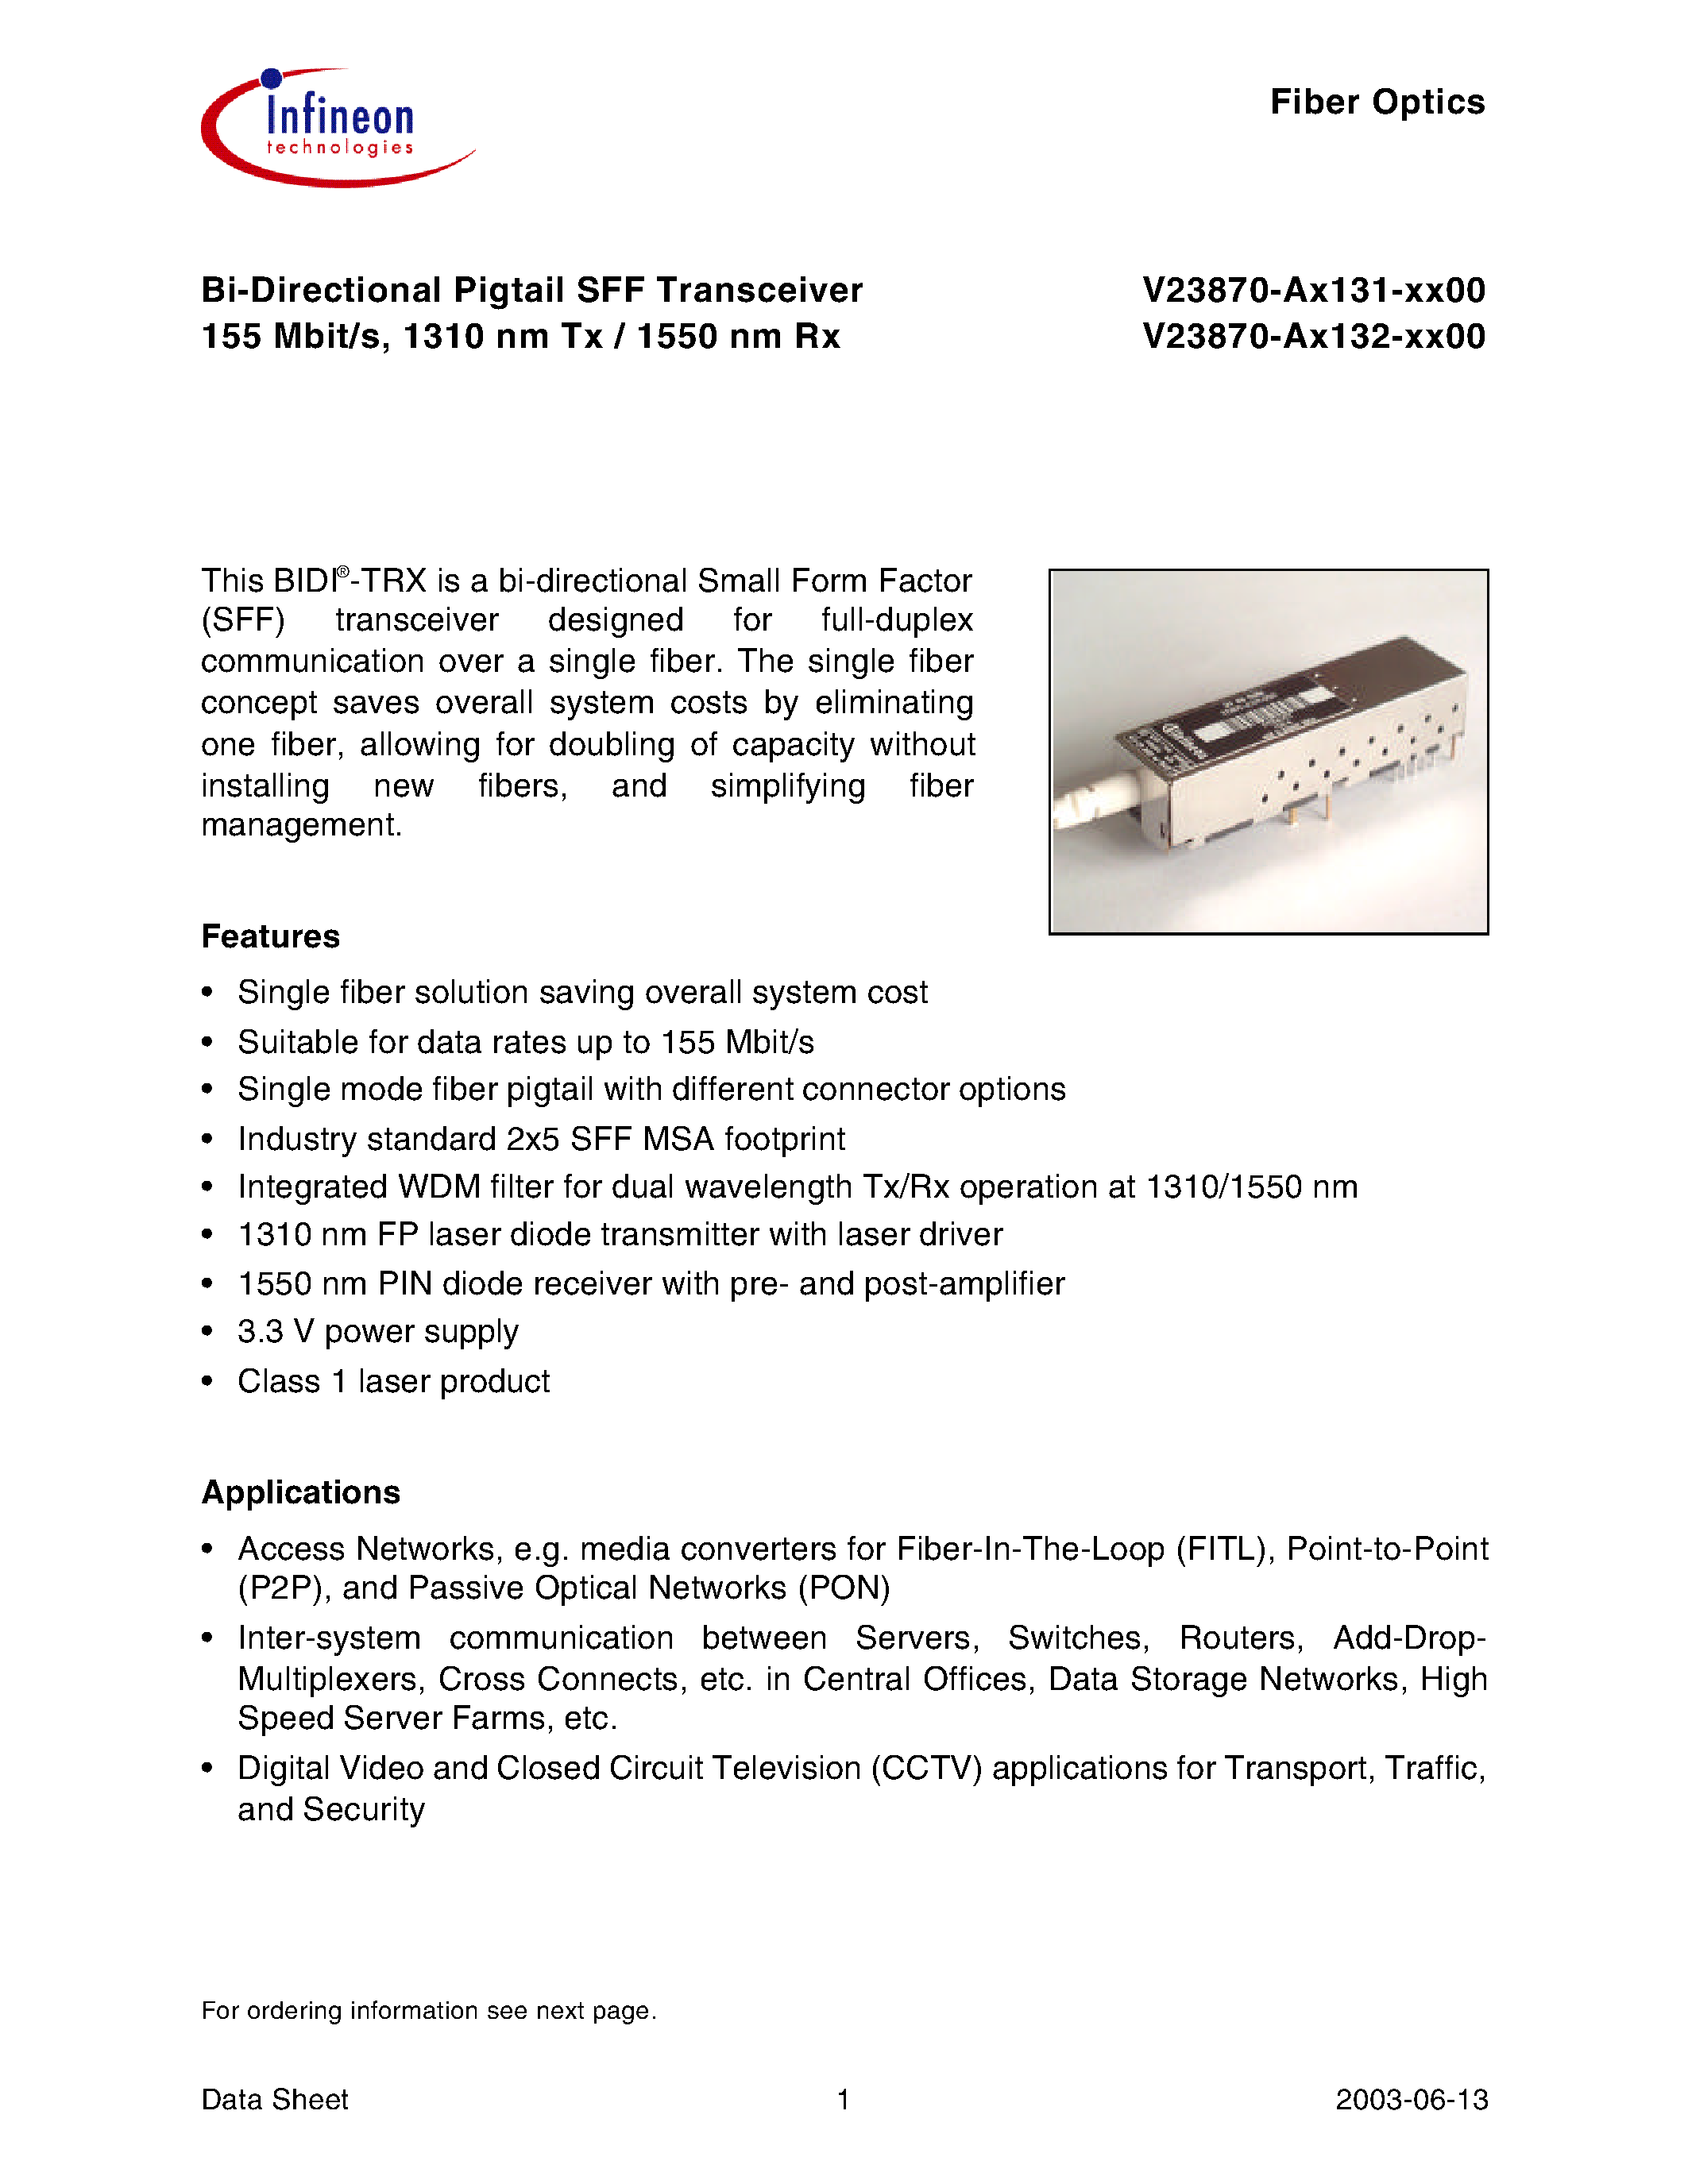 Datasheet V23870-A3131-A600 - Bi-Directional Pigtail SFF Transceiver 155 Mbit/s/ 1310 nm Tx / 1550 nm Rx page 1